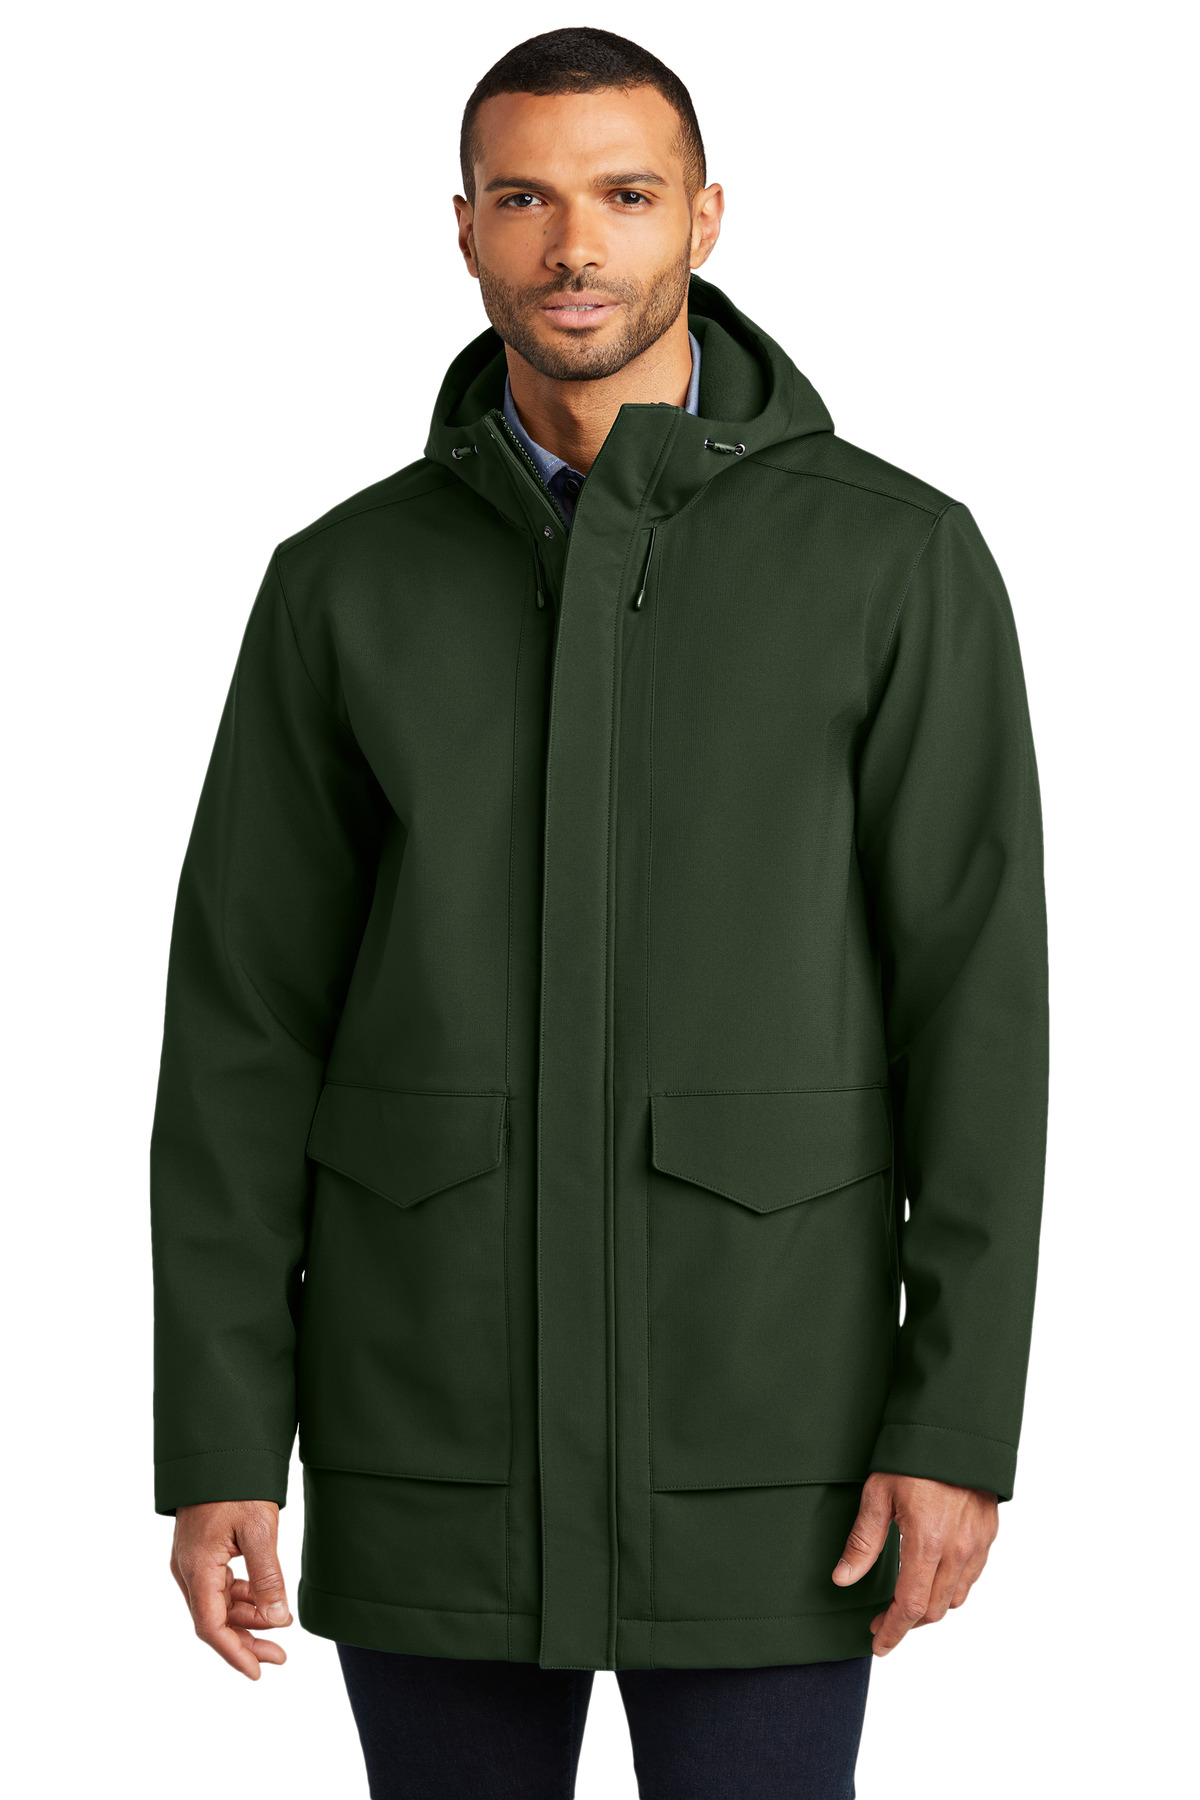 Port Authority Collective Outer Soft Shell Parka-Port Authority